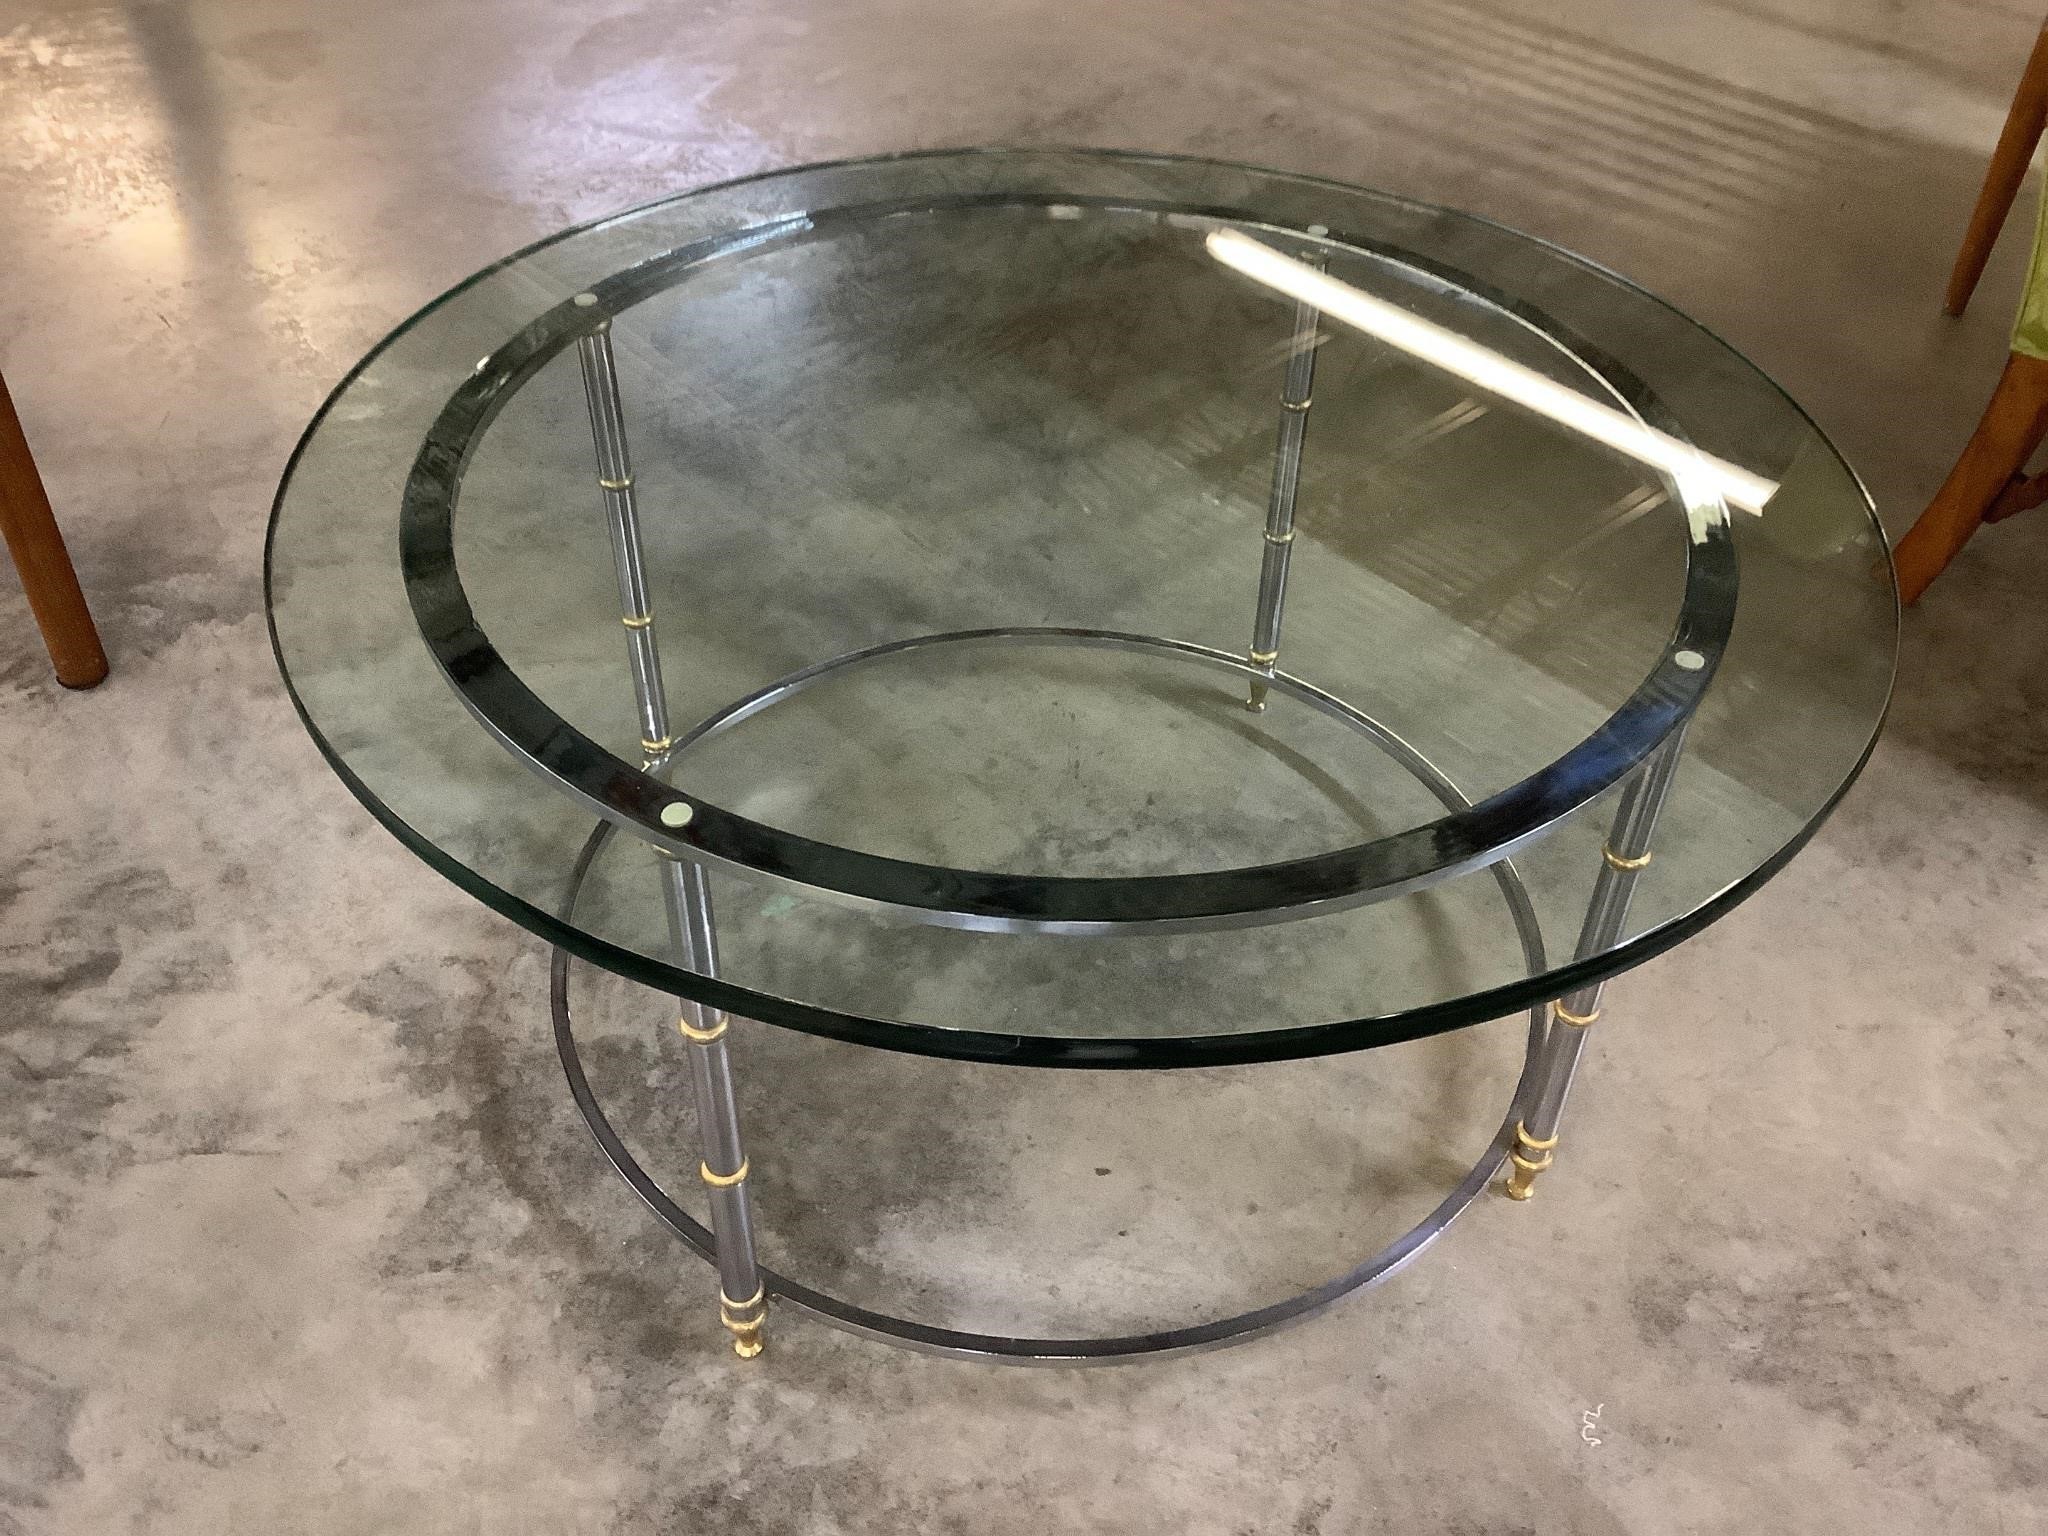 36” round -18” high (3/4” glass) table